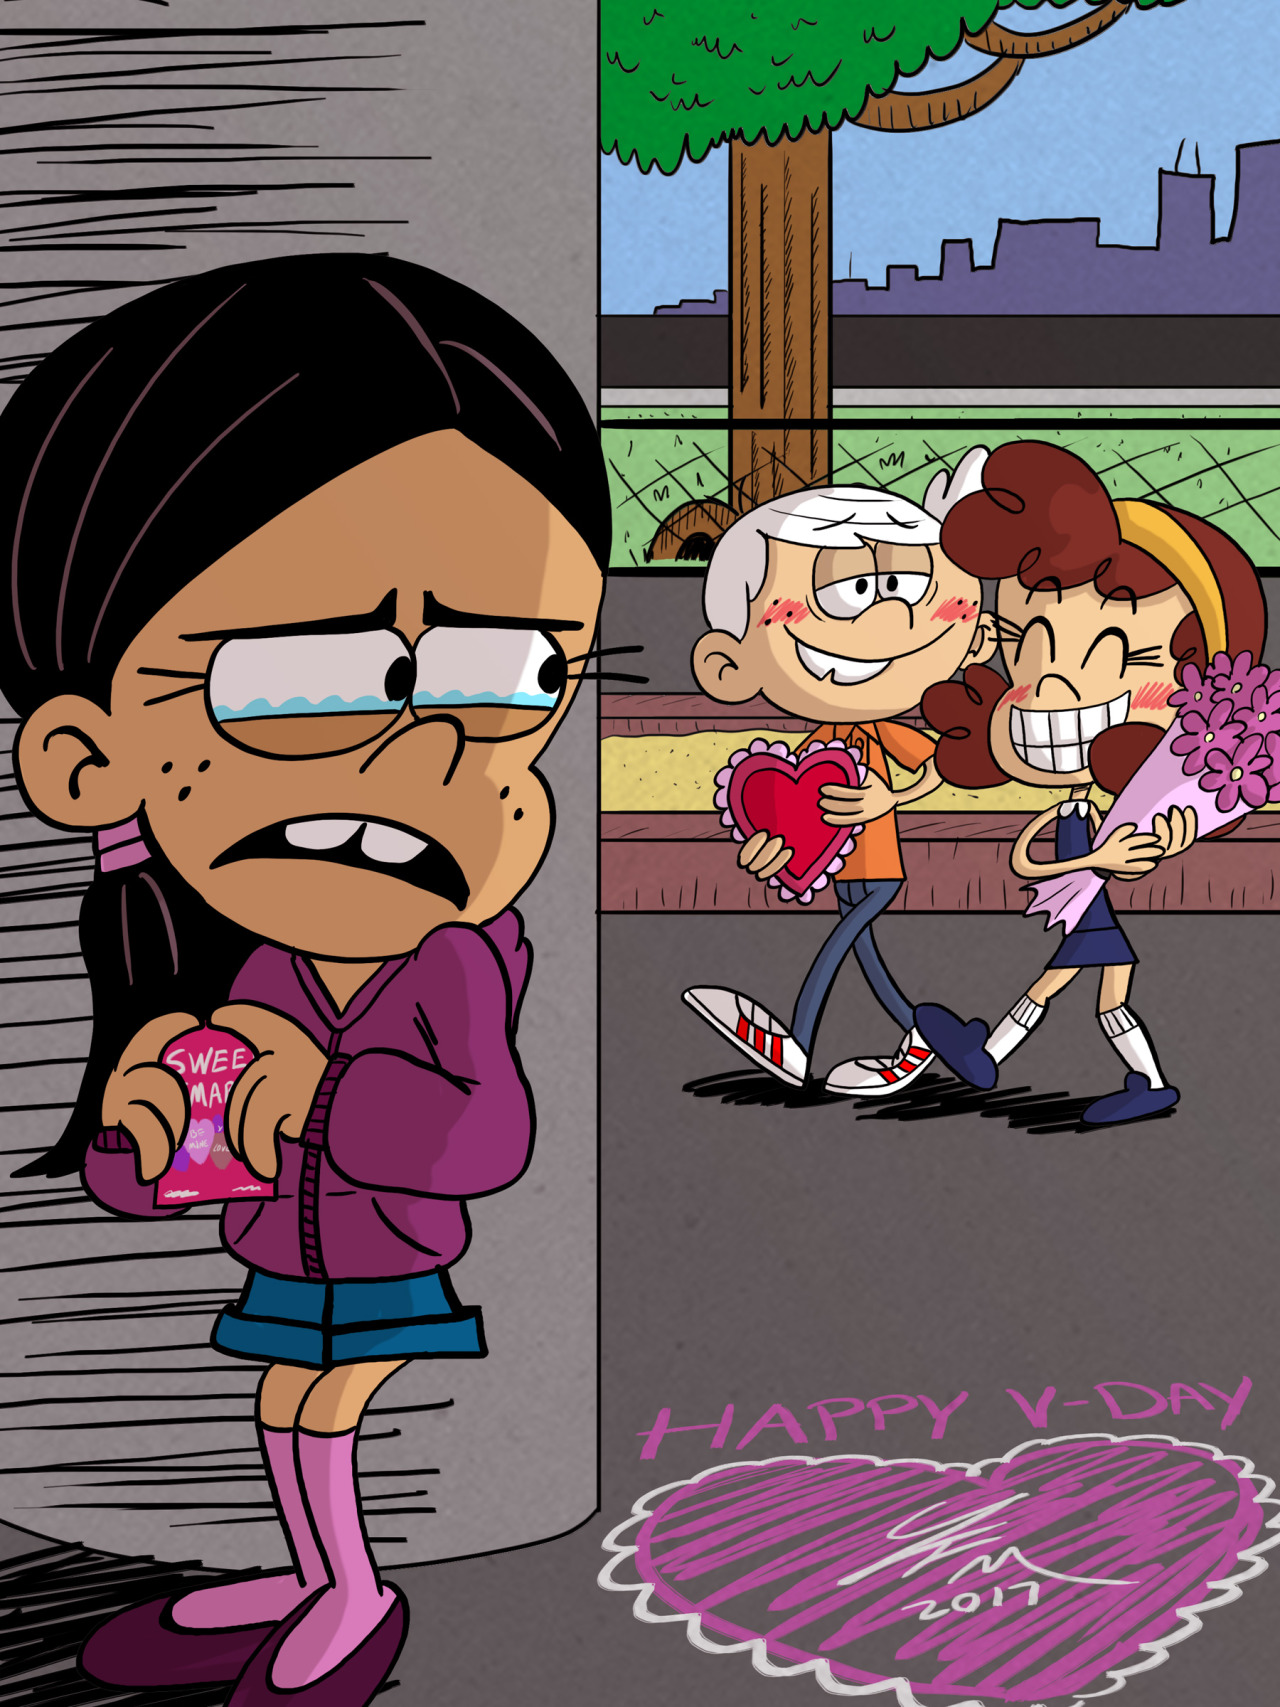 jfmstudios: “Playground Love”   Alright folks, this right here is my Loud House